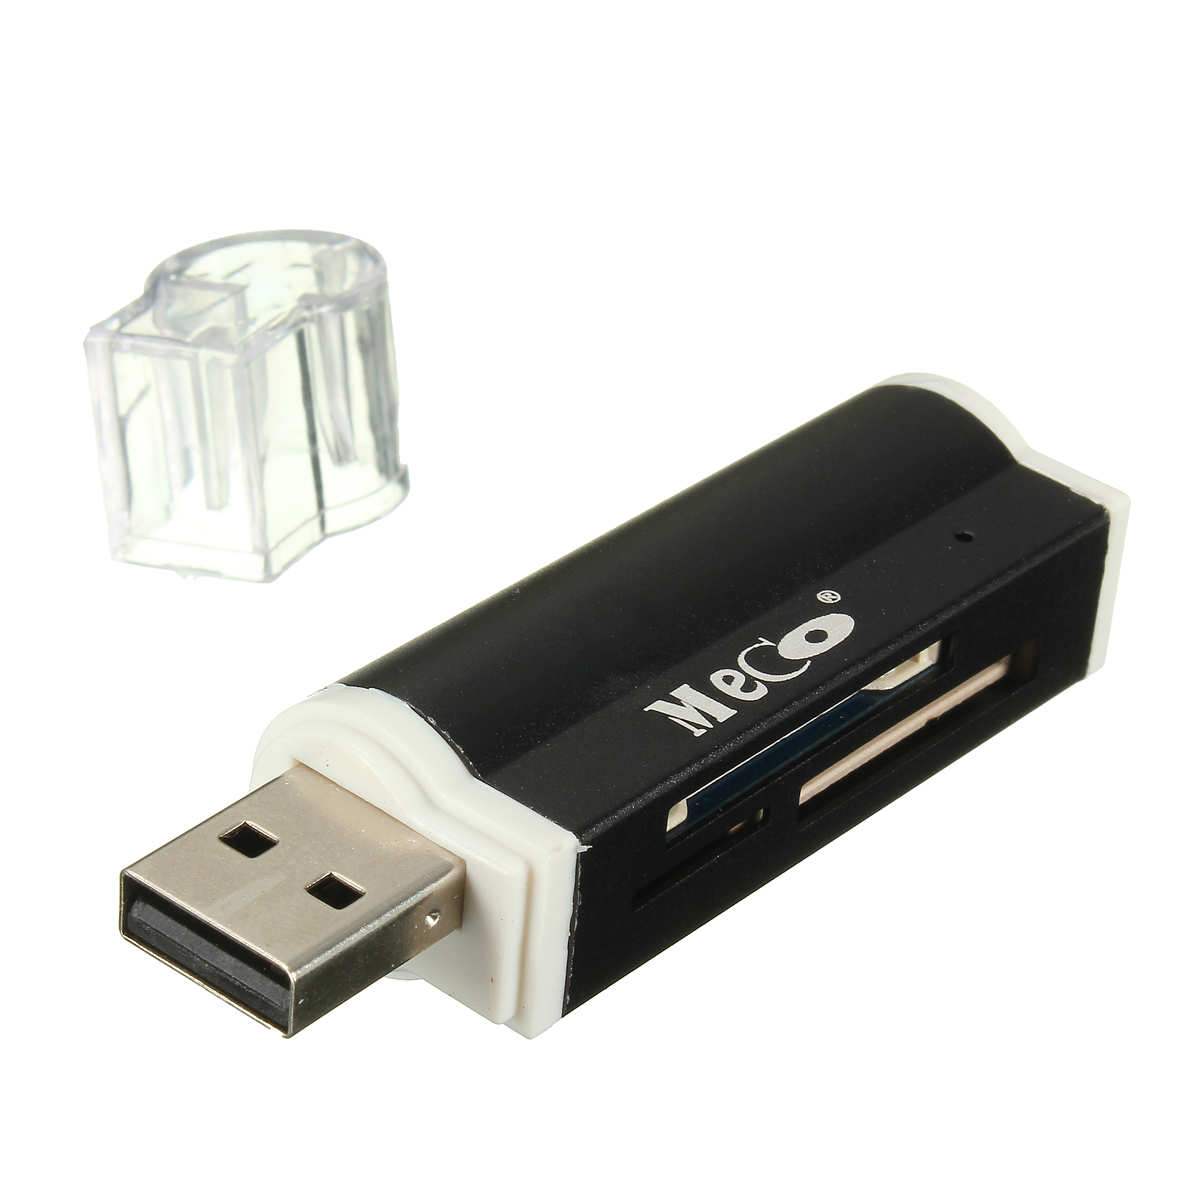 Meco-SY-662-USB20-Multifunctional-Card-Reader-TF--SD--SDHC--MMC-Memory-Card-Adapter-With-Sling-1884377-1